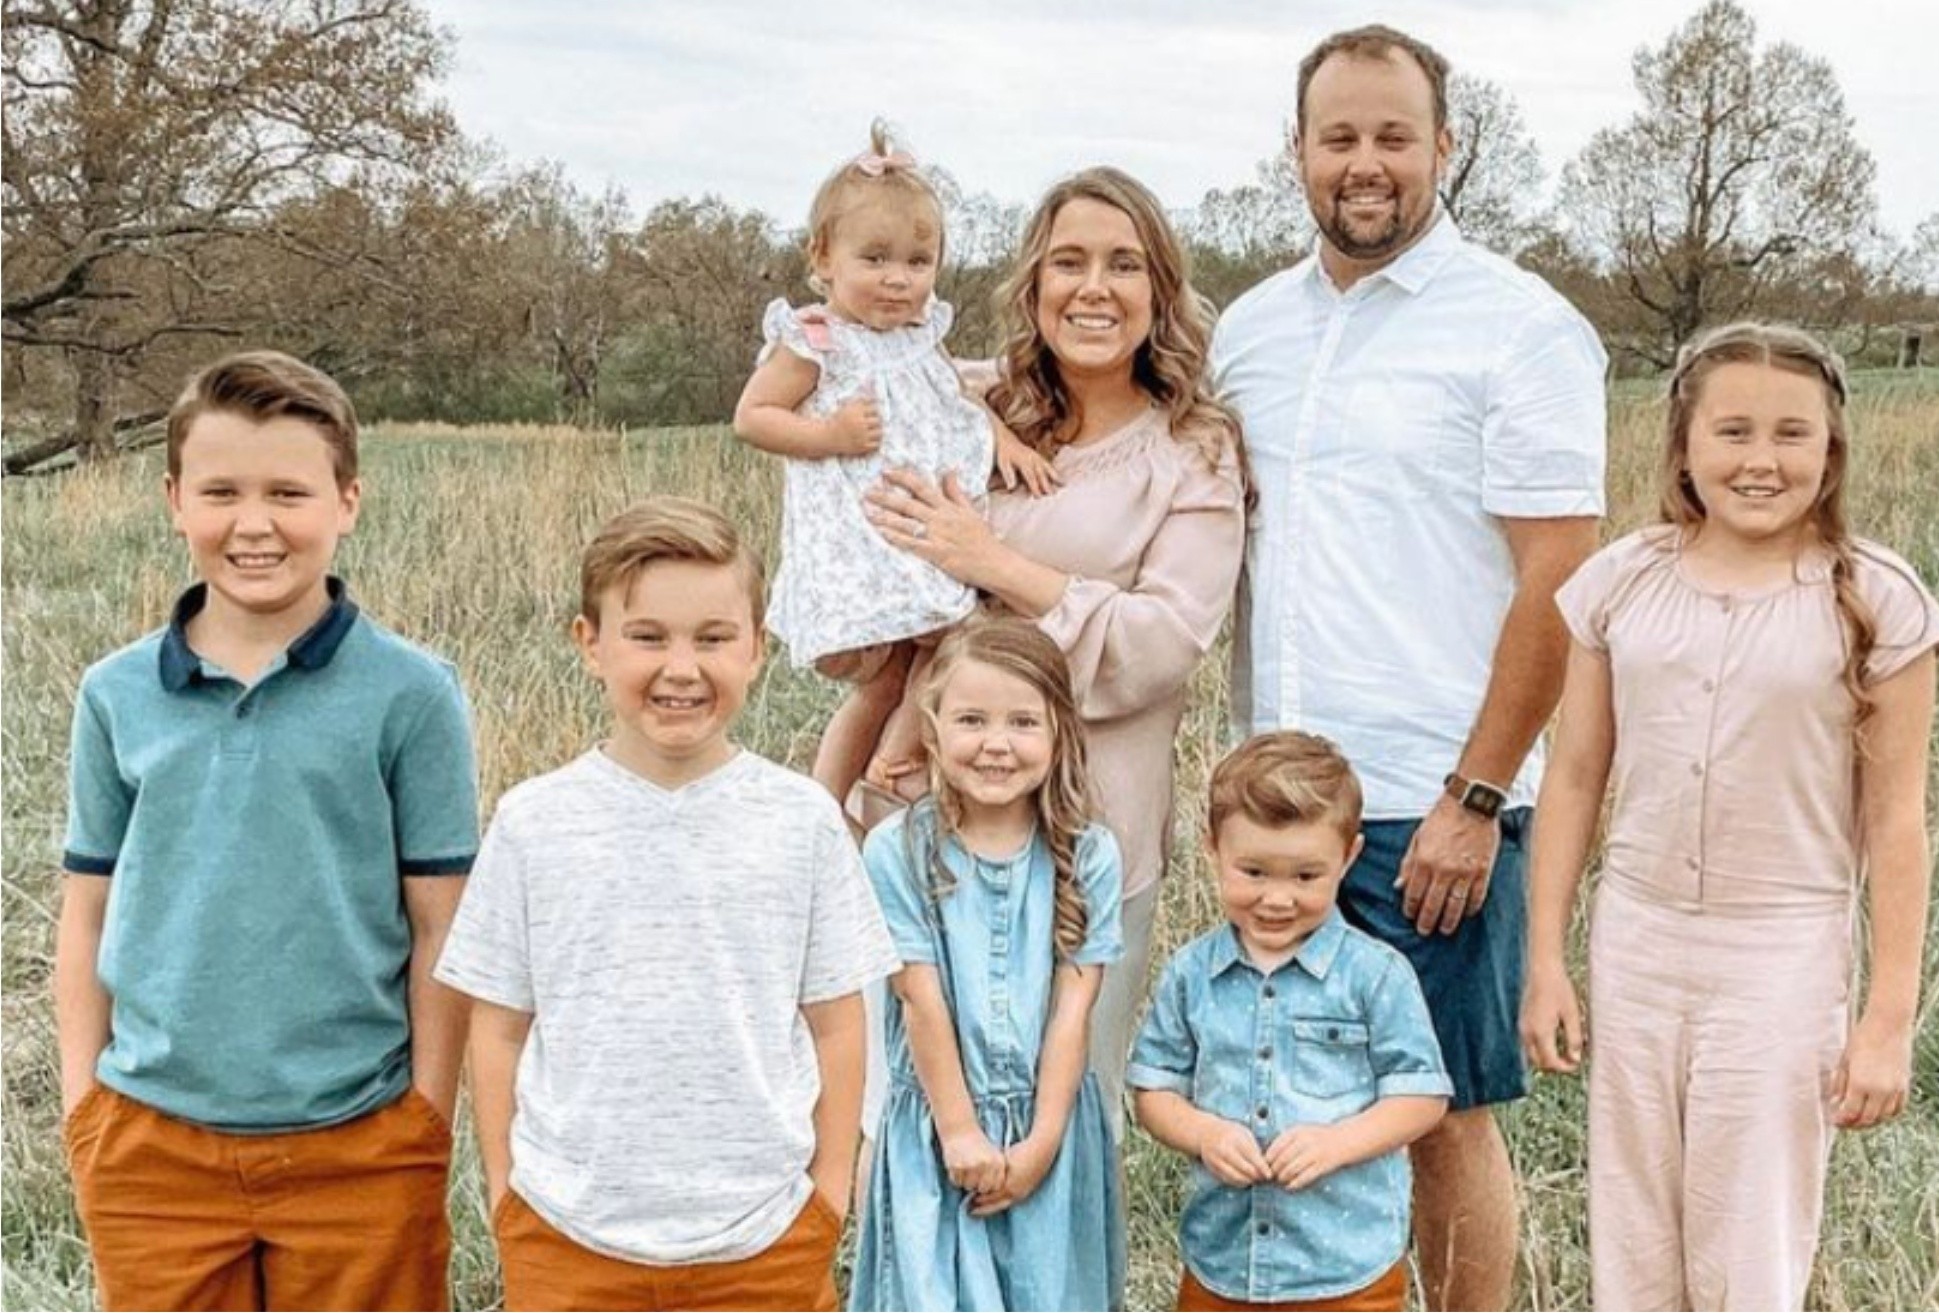 Josh Duggar And Anna Duggar Celebrate Anniversary! Here's Where She Posted About It?